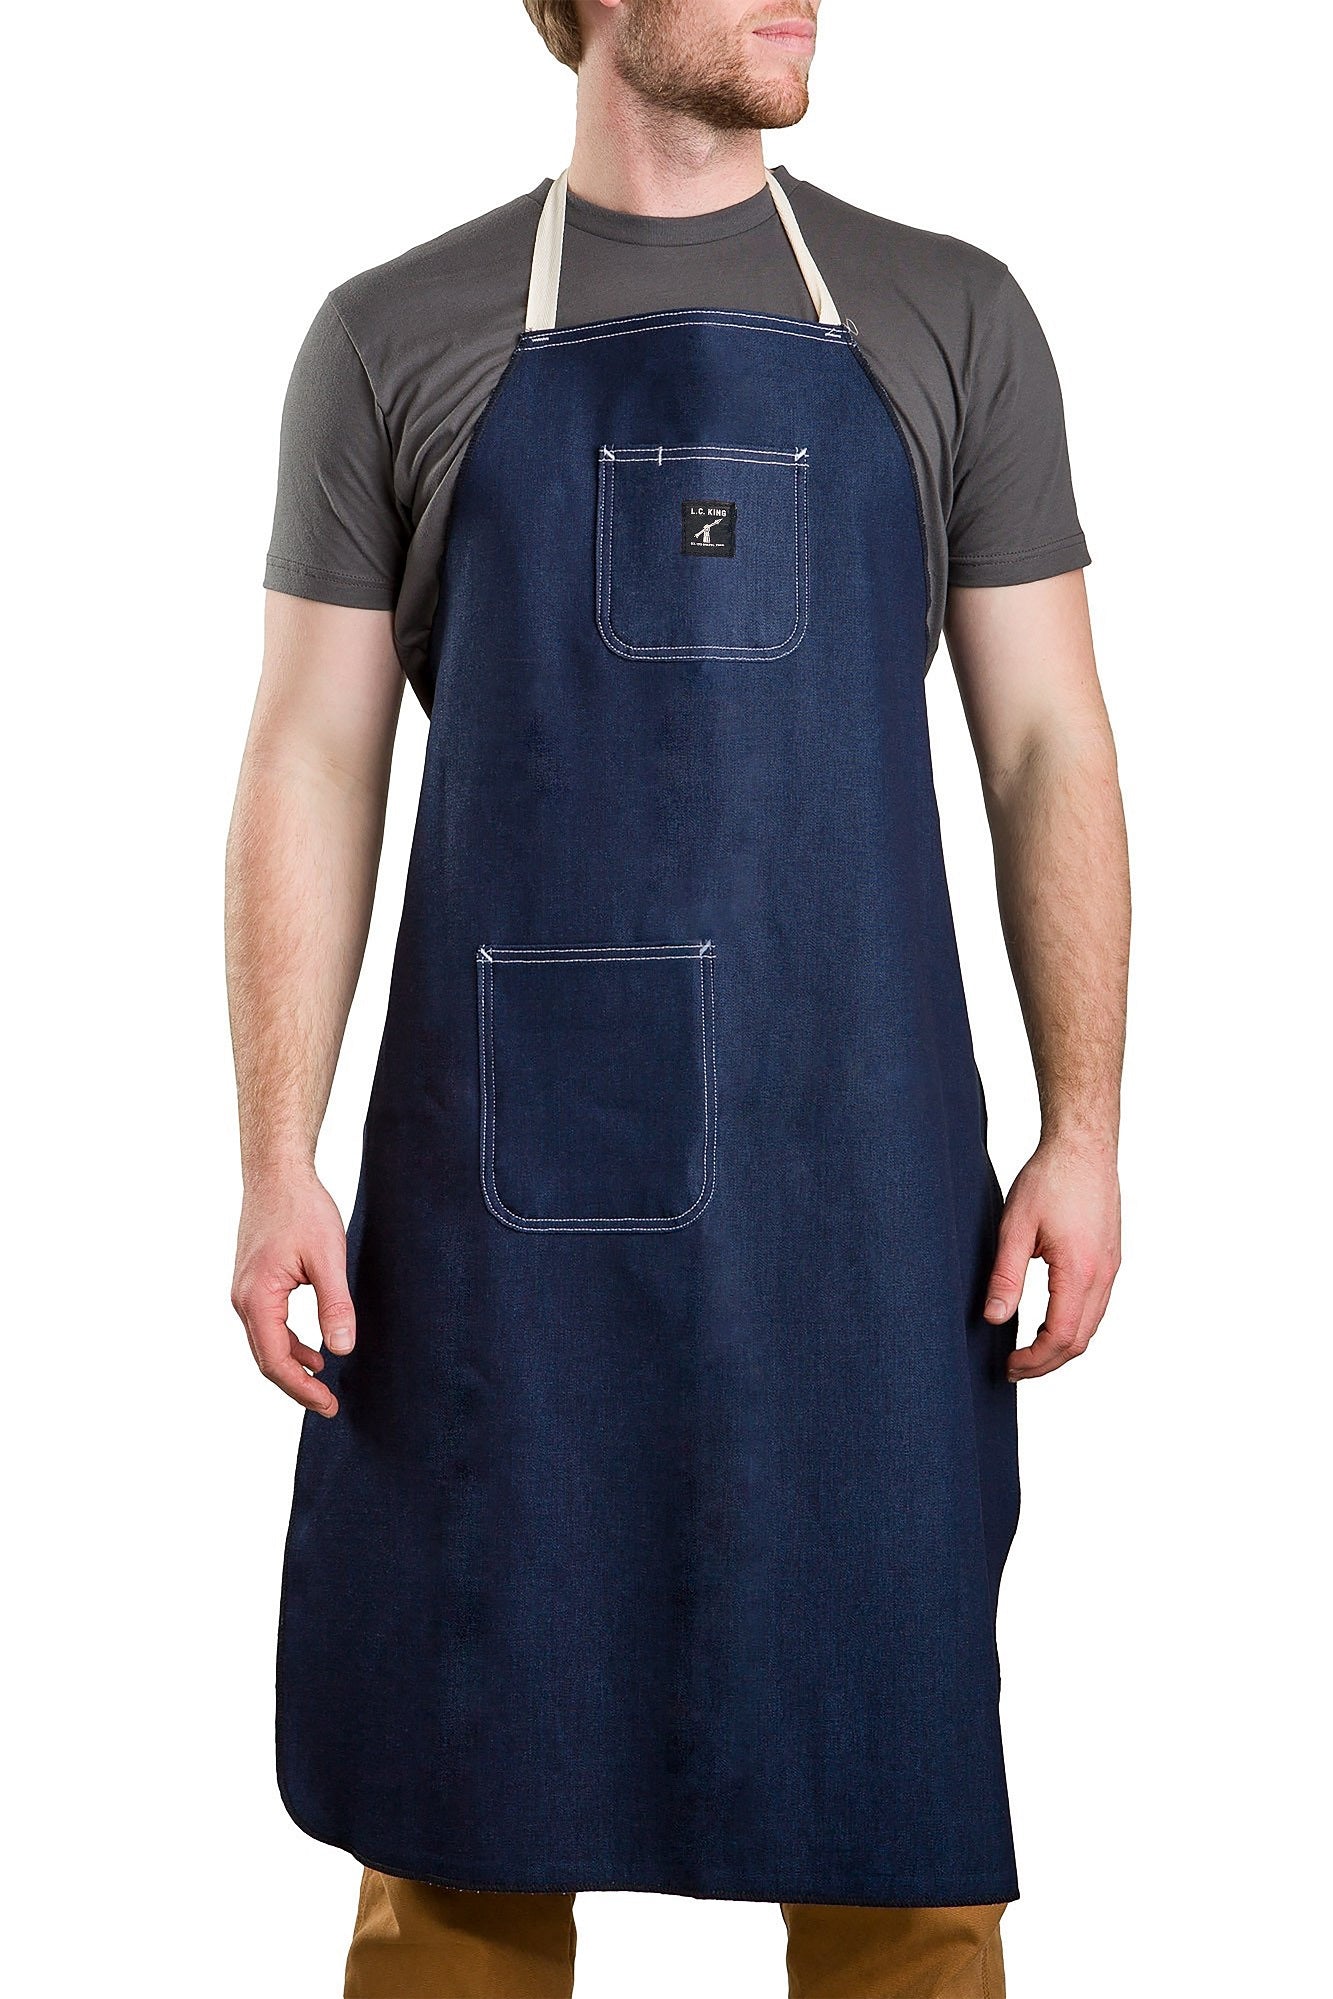 Amazon.com: QWORK Heavy Duty Denim Work Apron With Pockets, Adjustable Jean  Tool Apron for Men and Women : Tools & Home Improvement